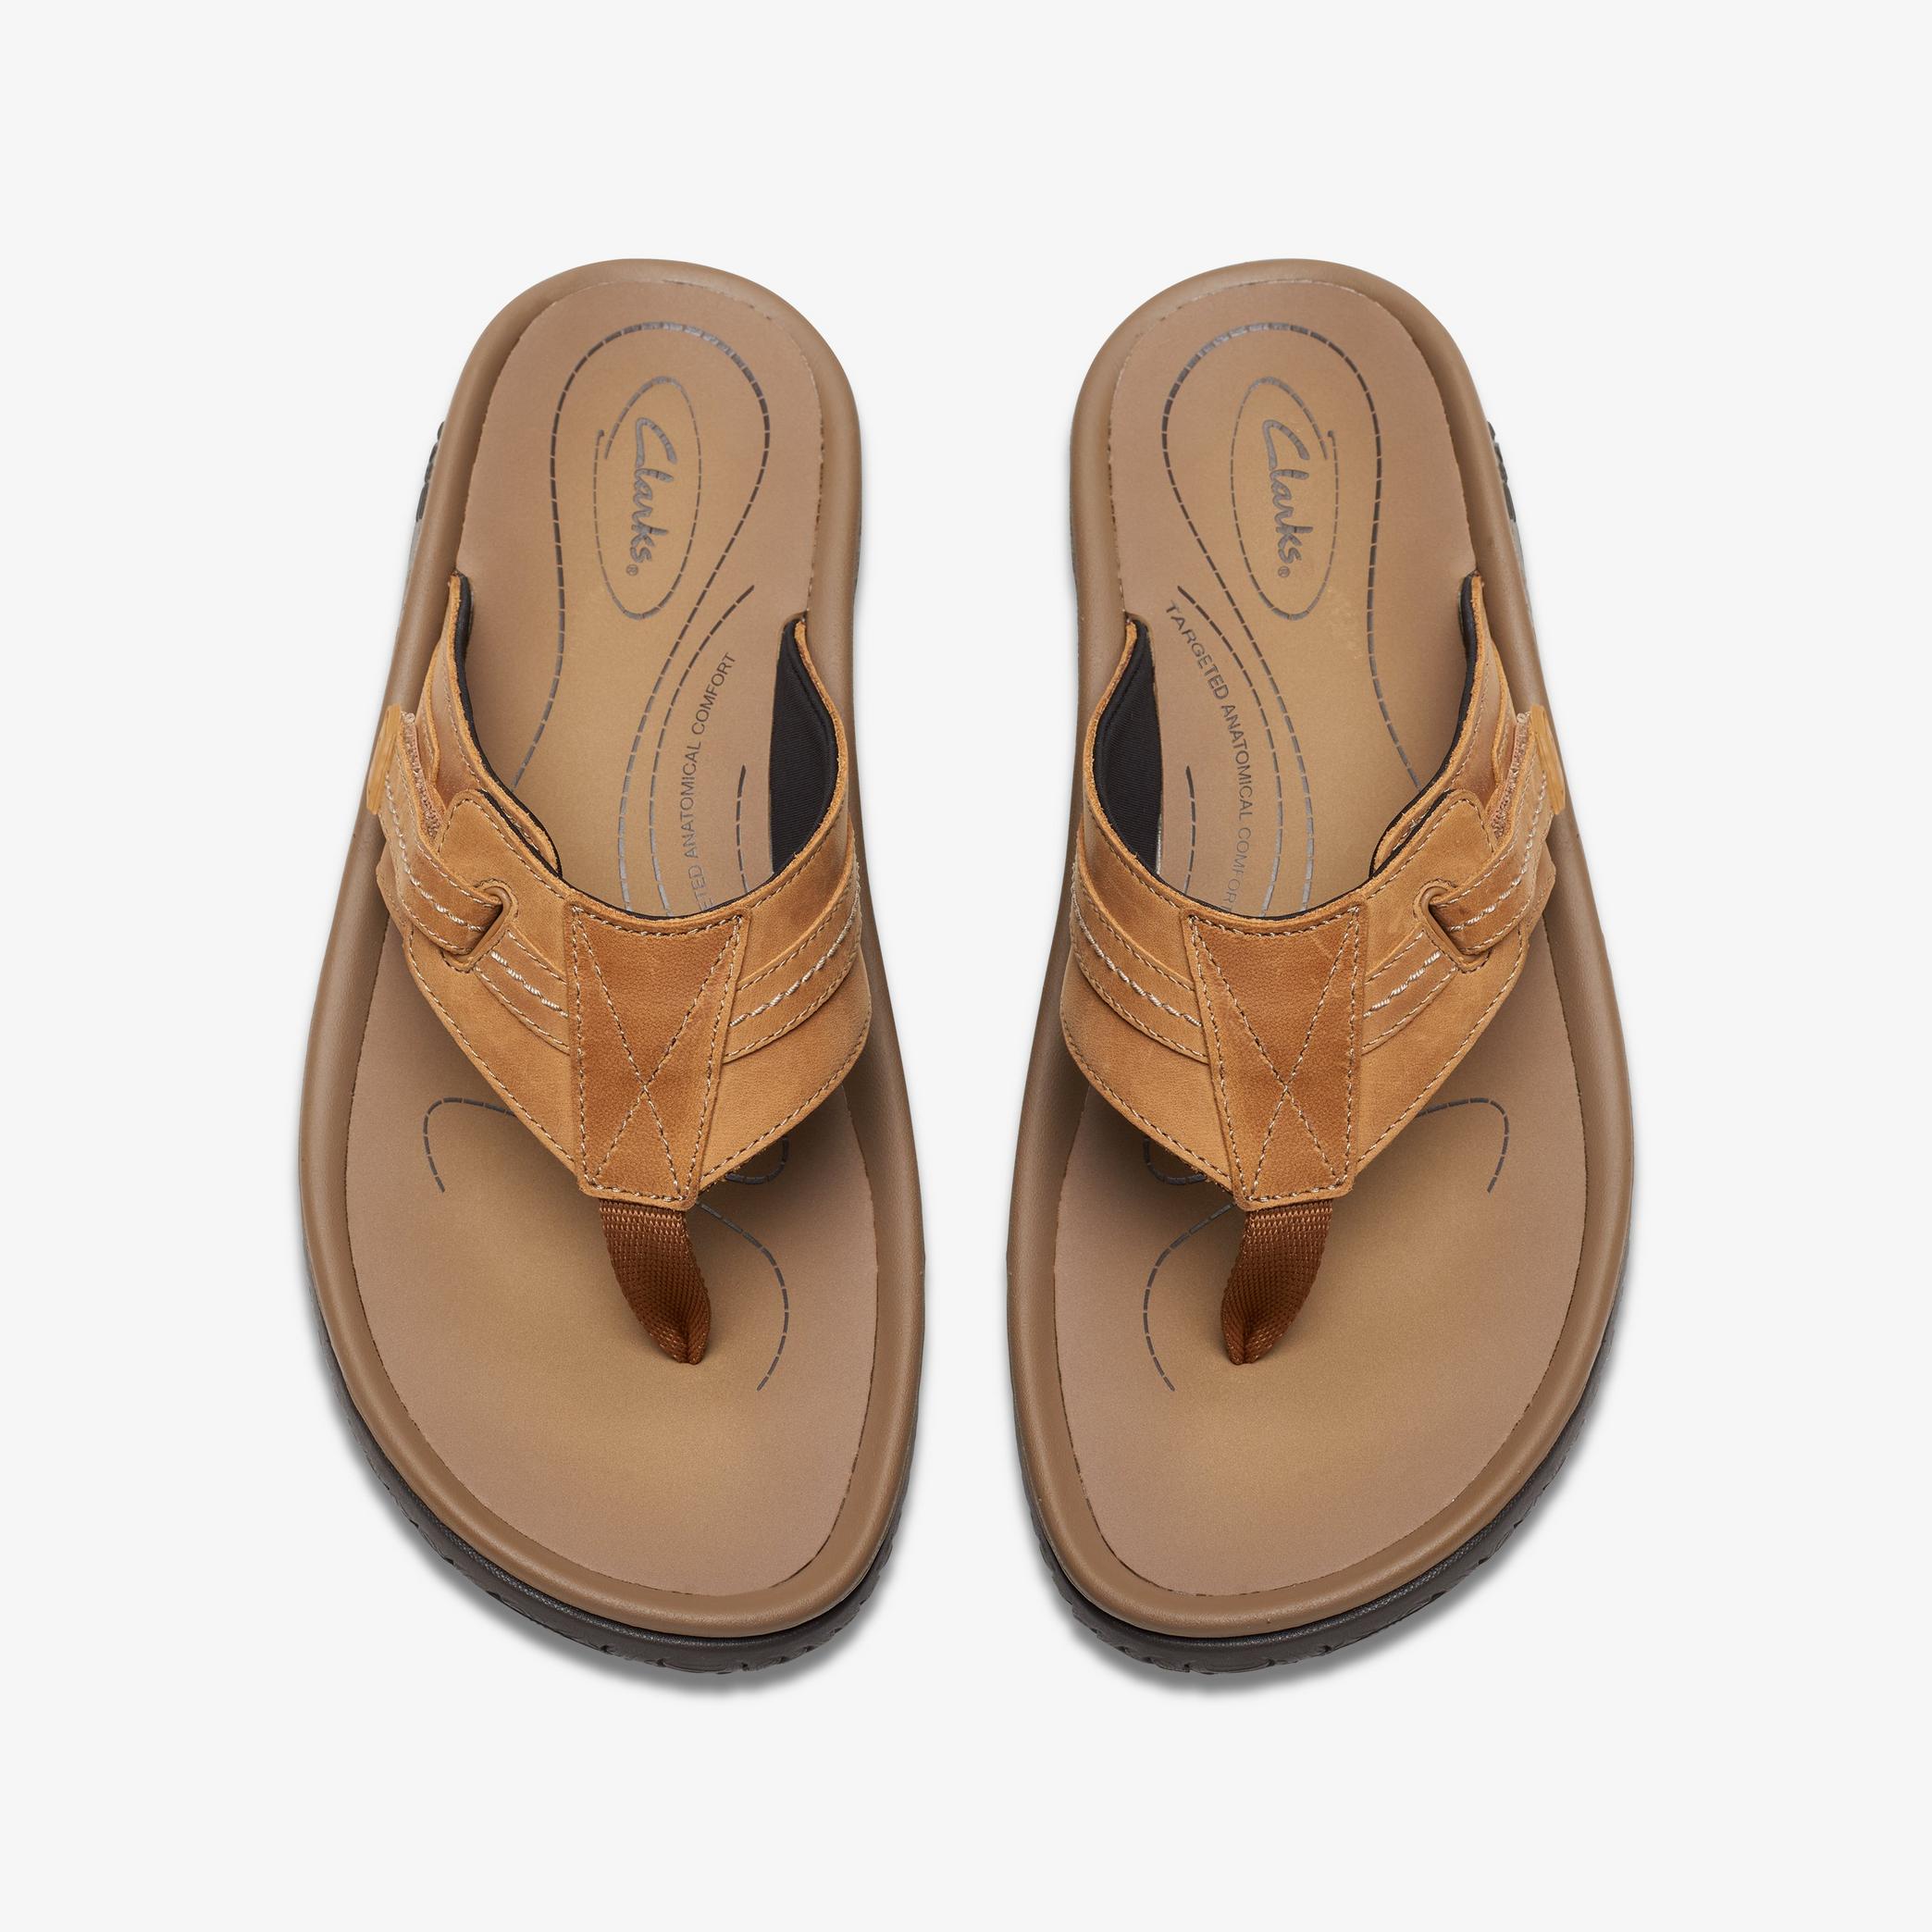 WESLEY SUN Tan Leather Flip Flop, view 6 of 6